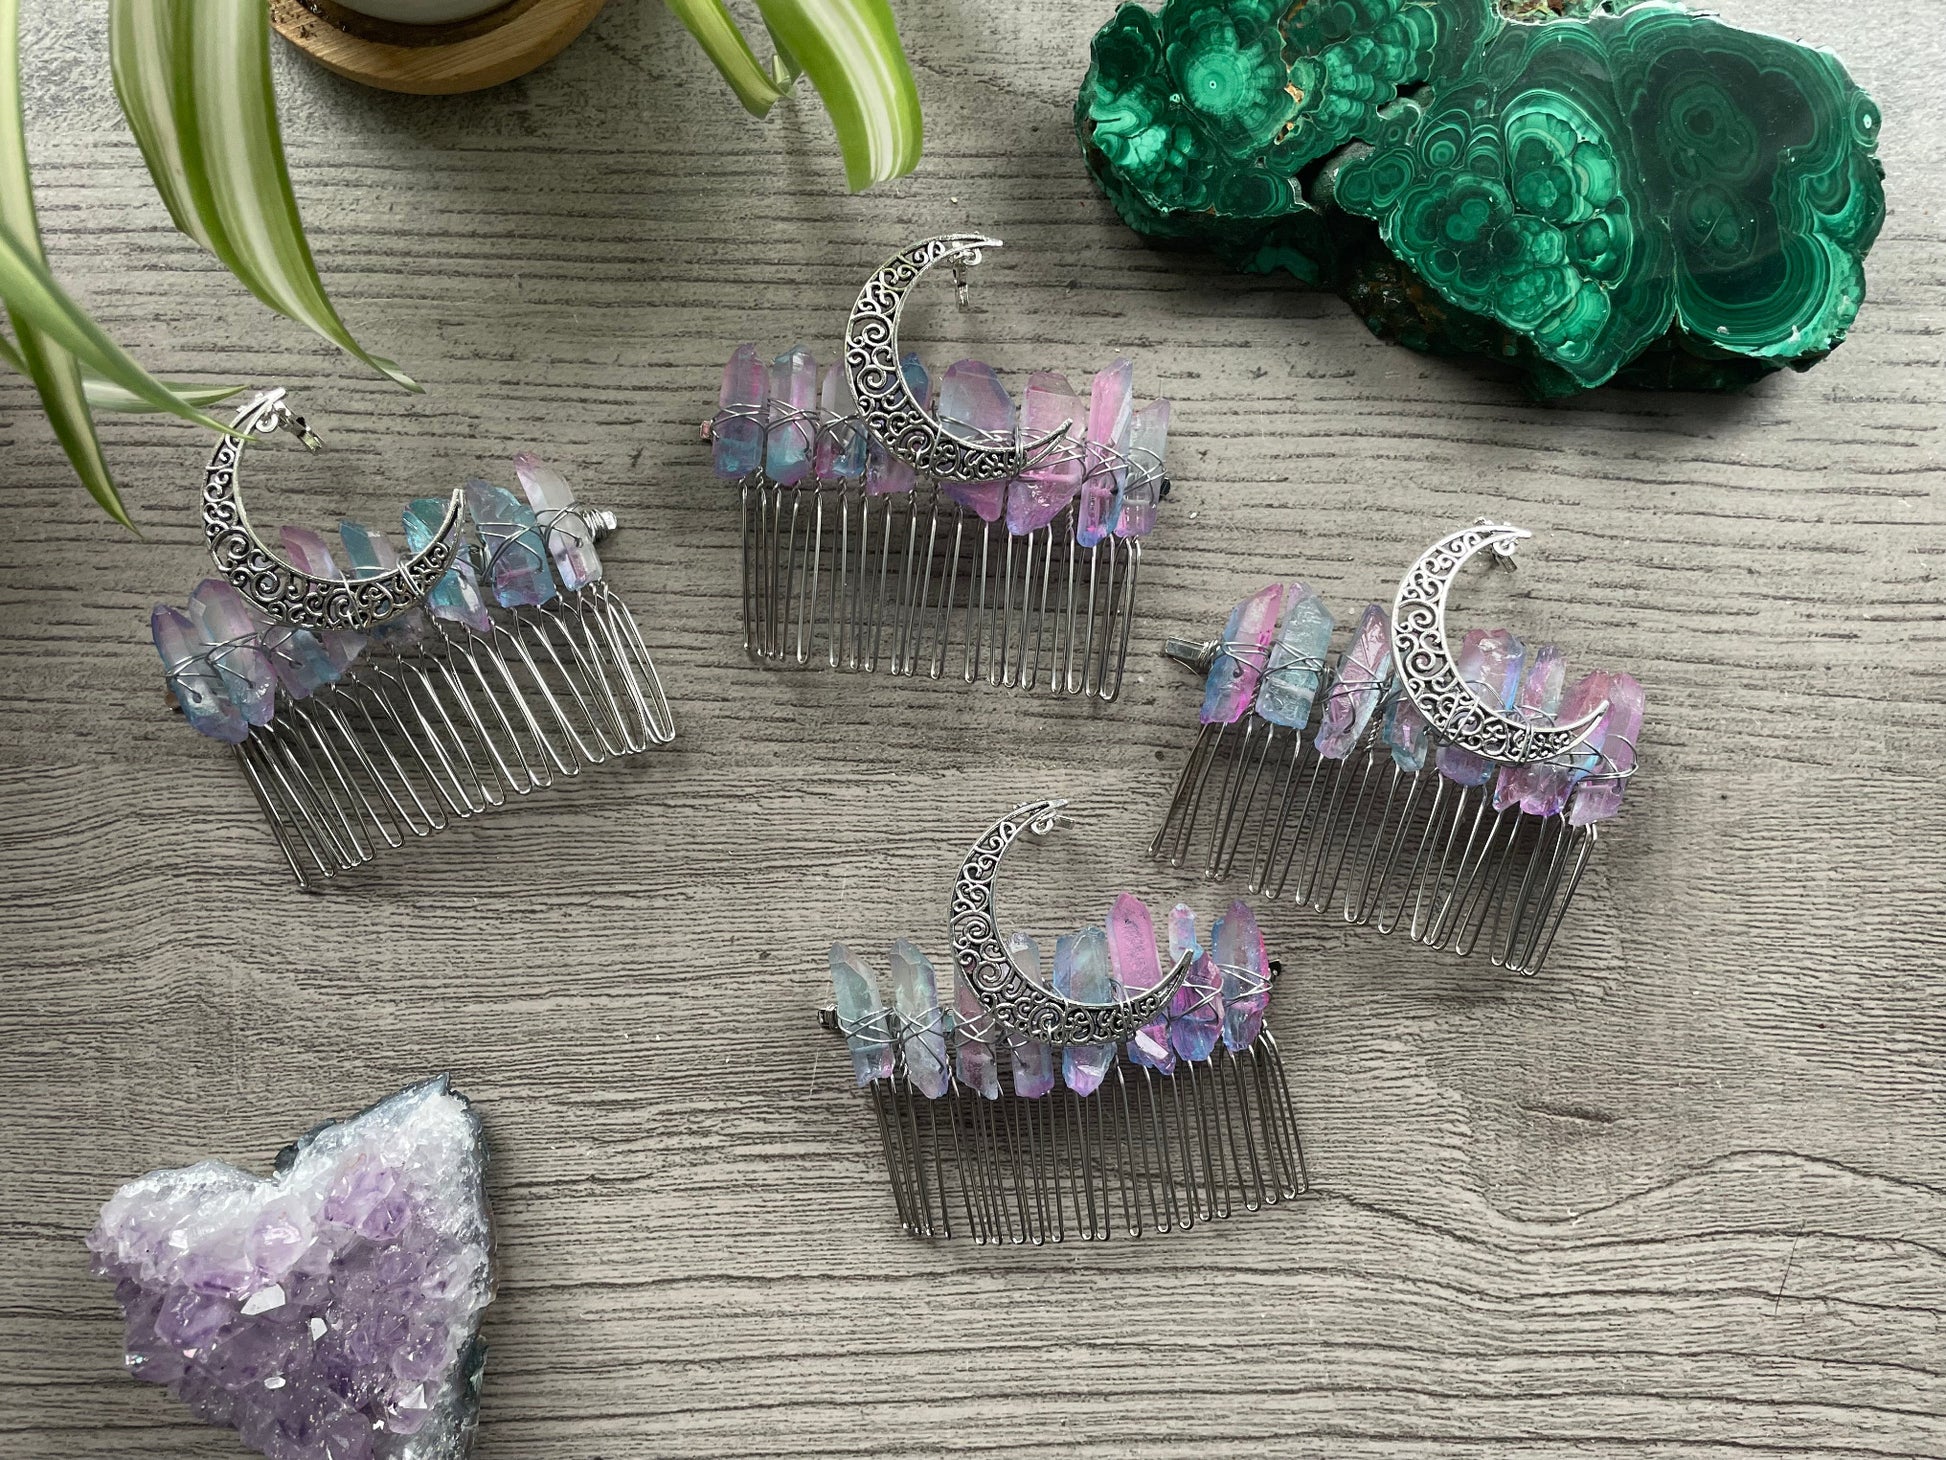 Pictured are various aura quartz hair combs with silver crescent moons on them.